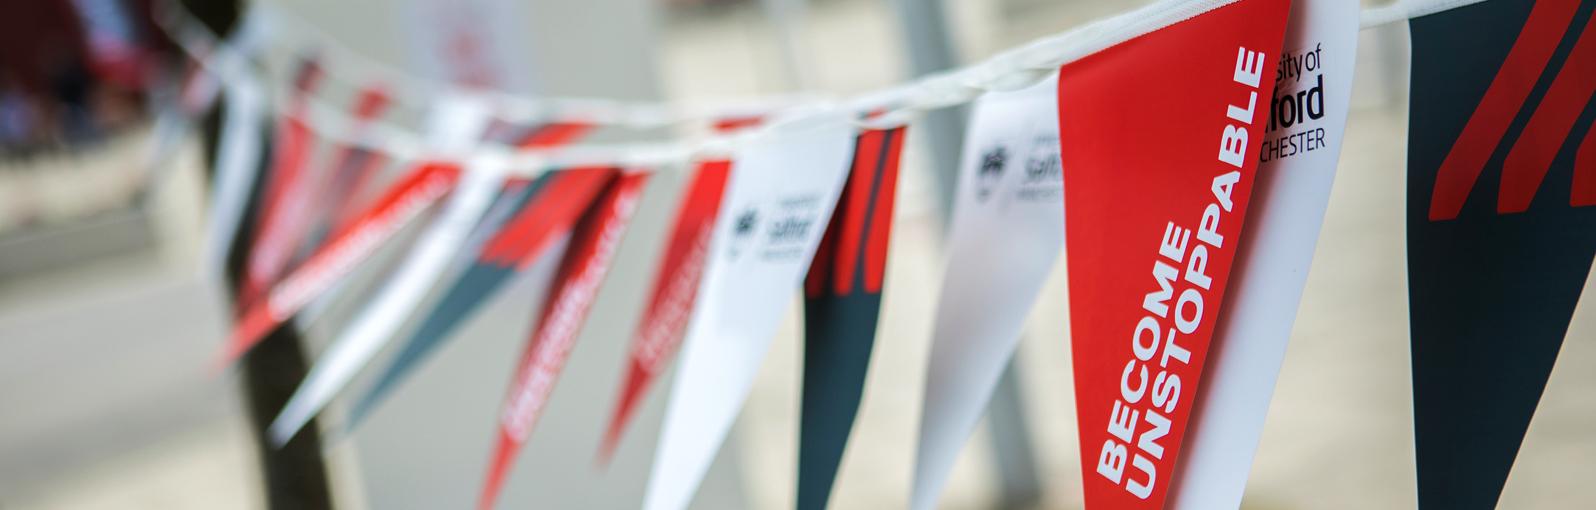 Become Unstoppable bunting at the University of Salford